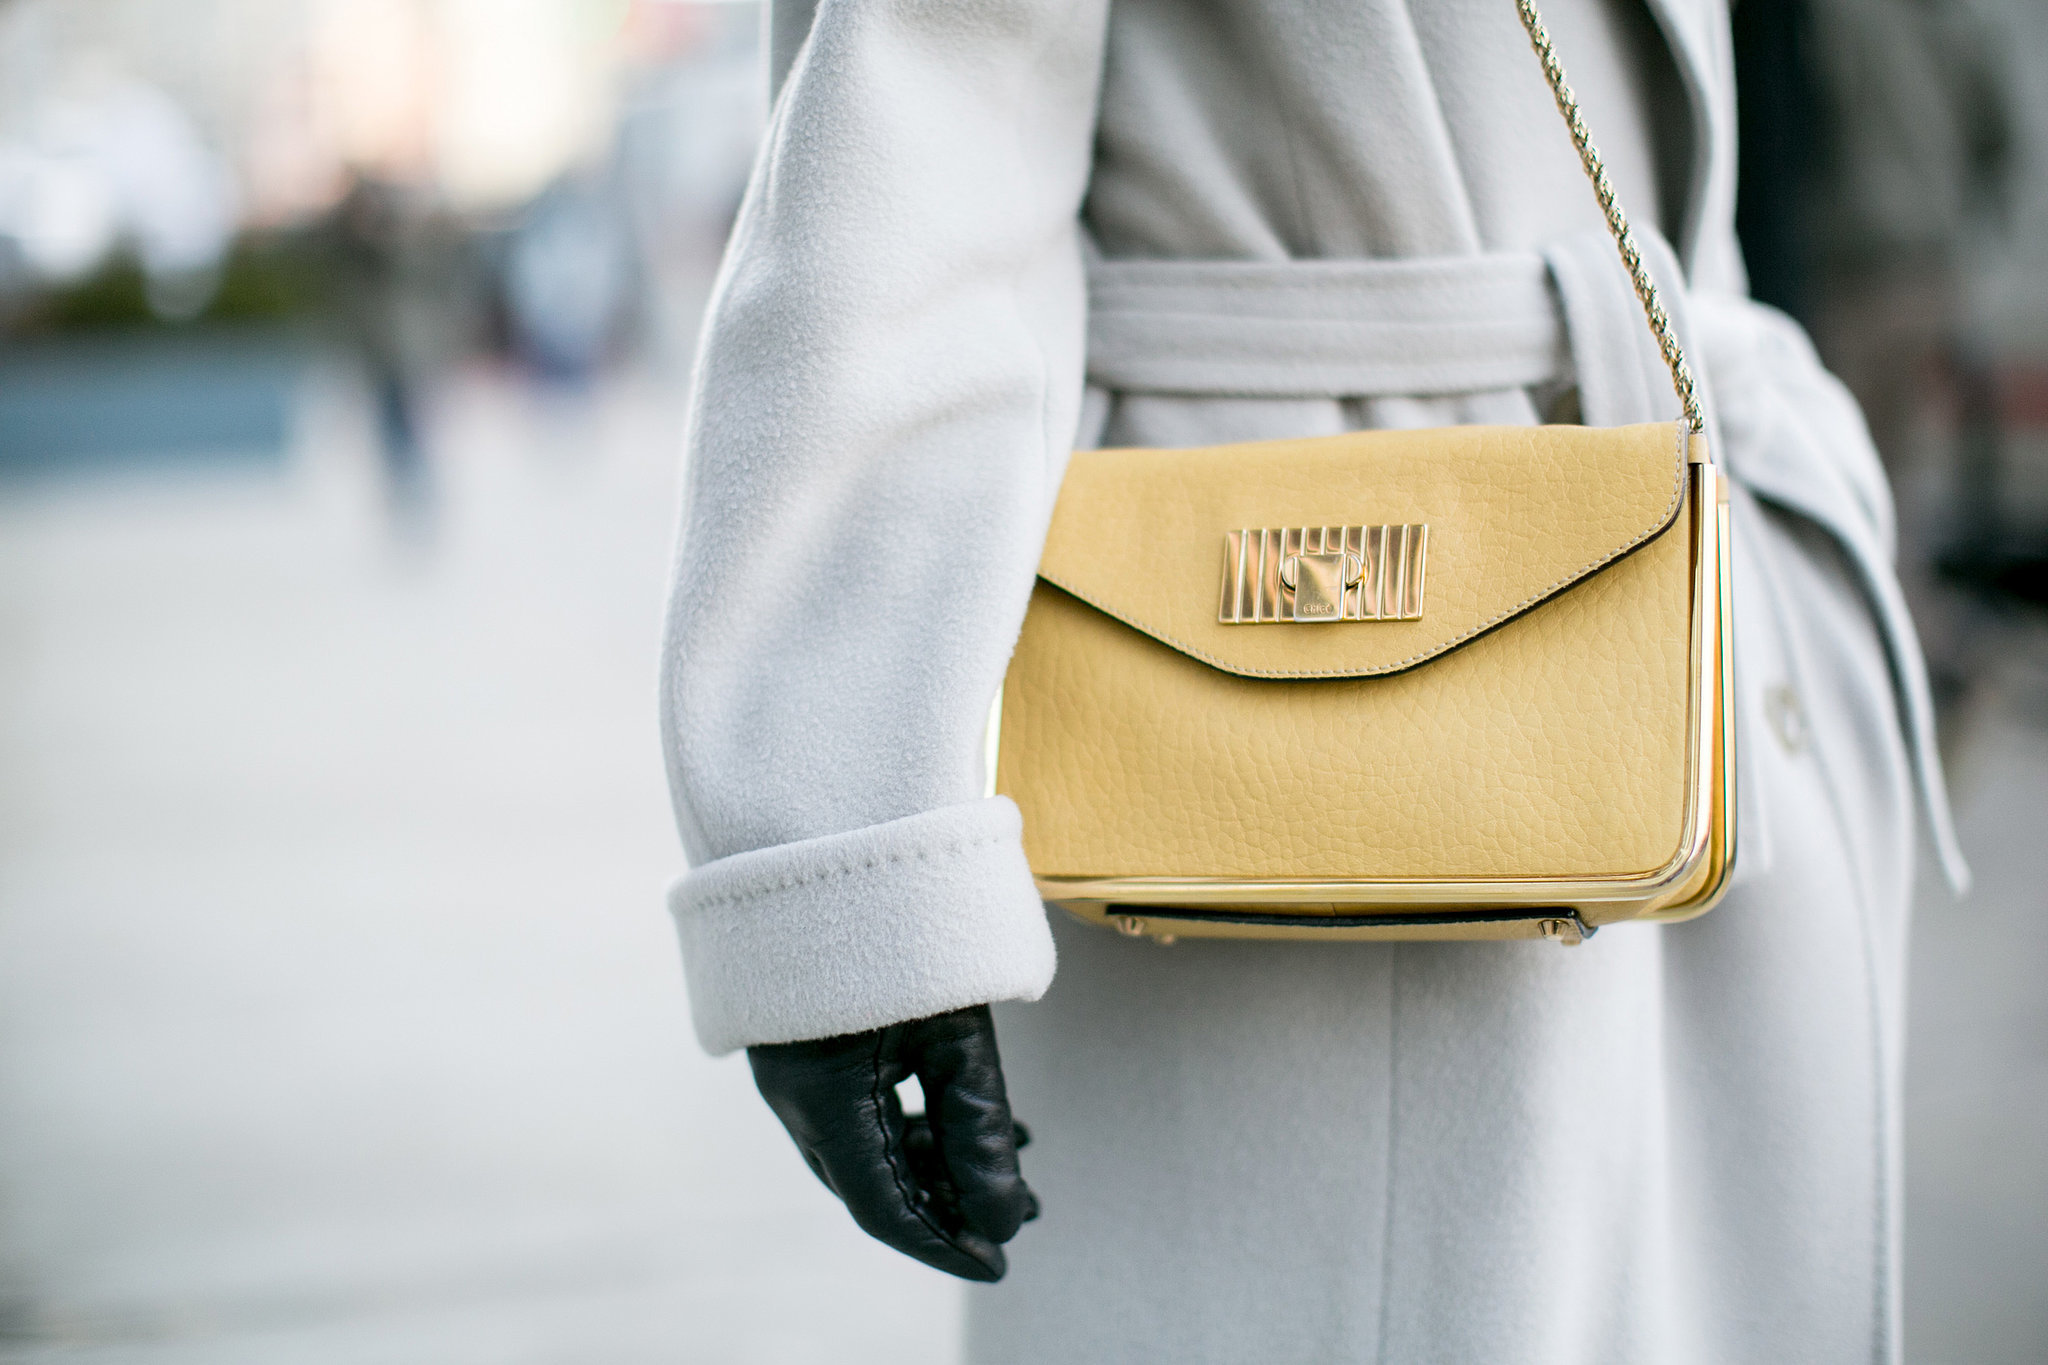 This pale yellow bag plays right into her pale color story. 
